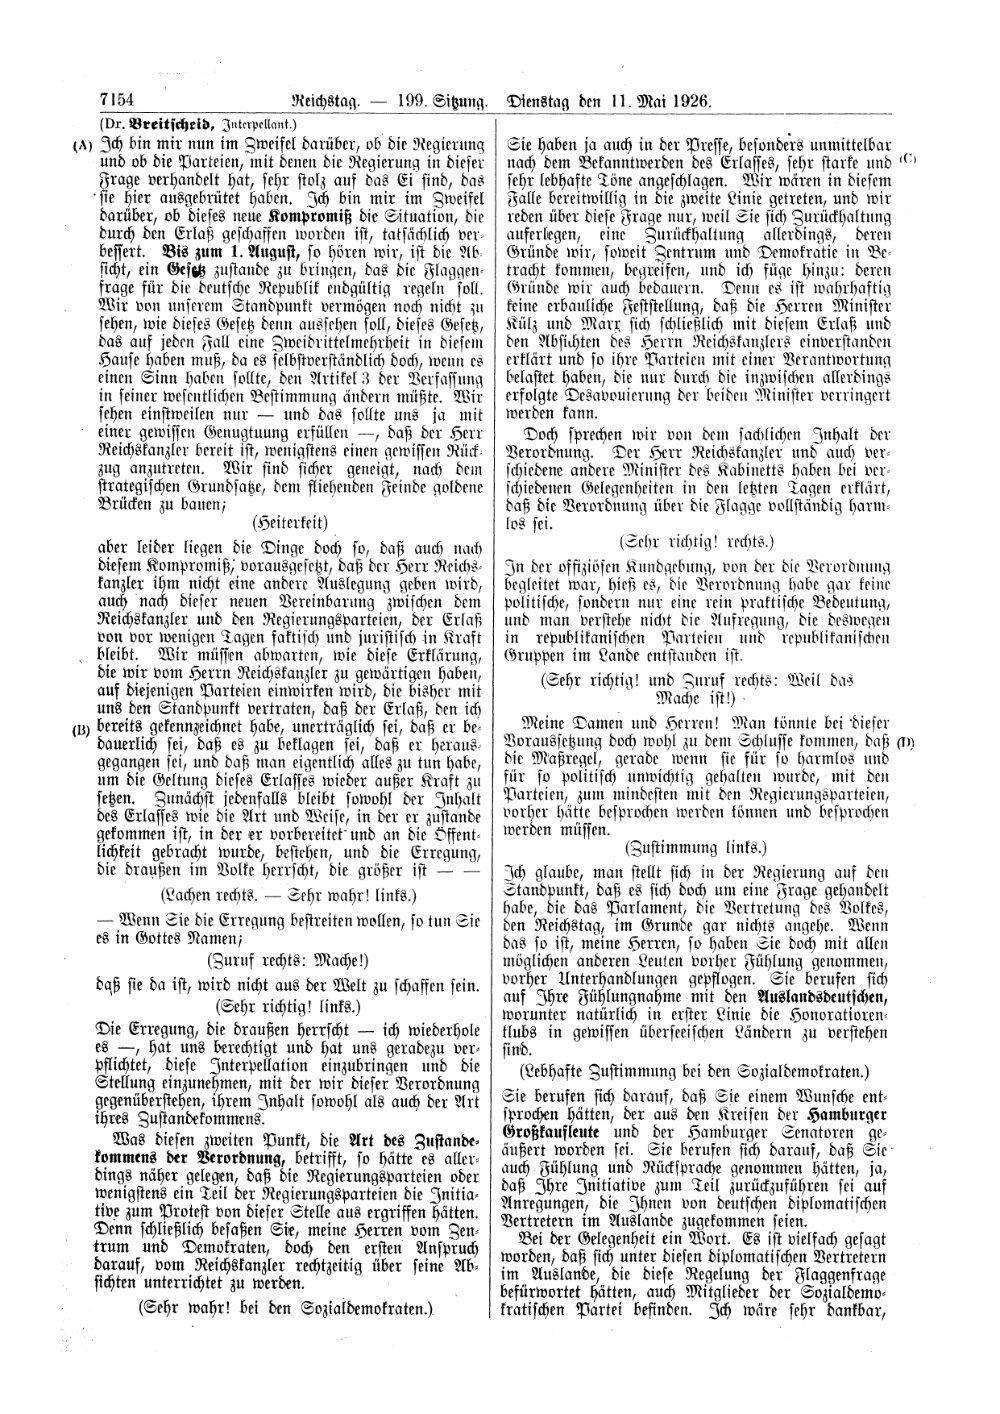 Scan of page 7154